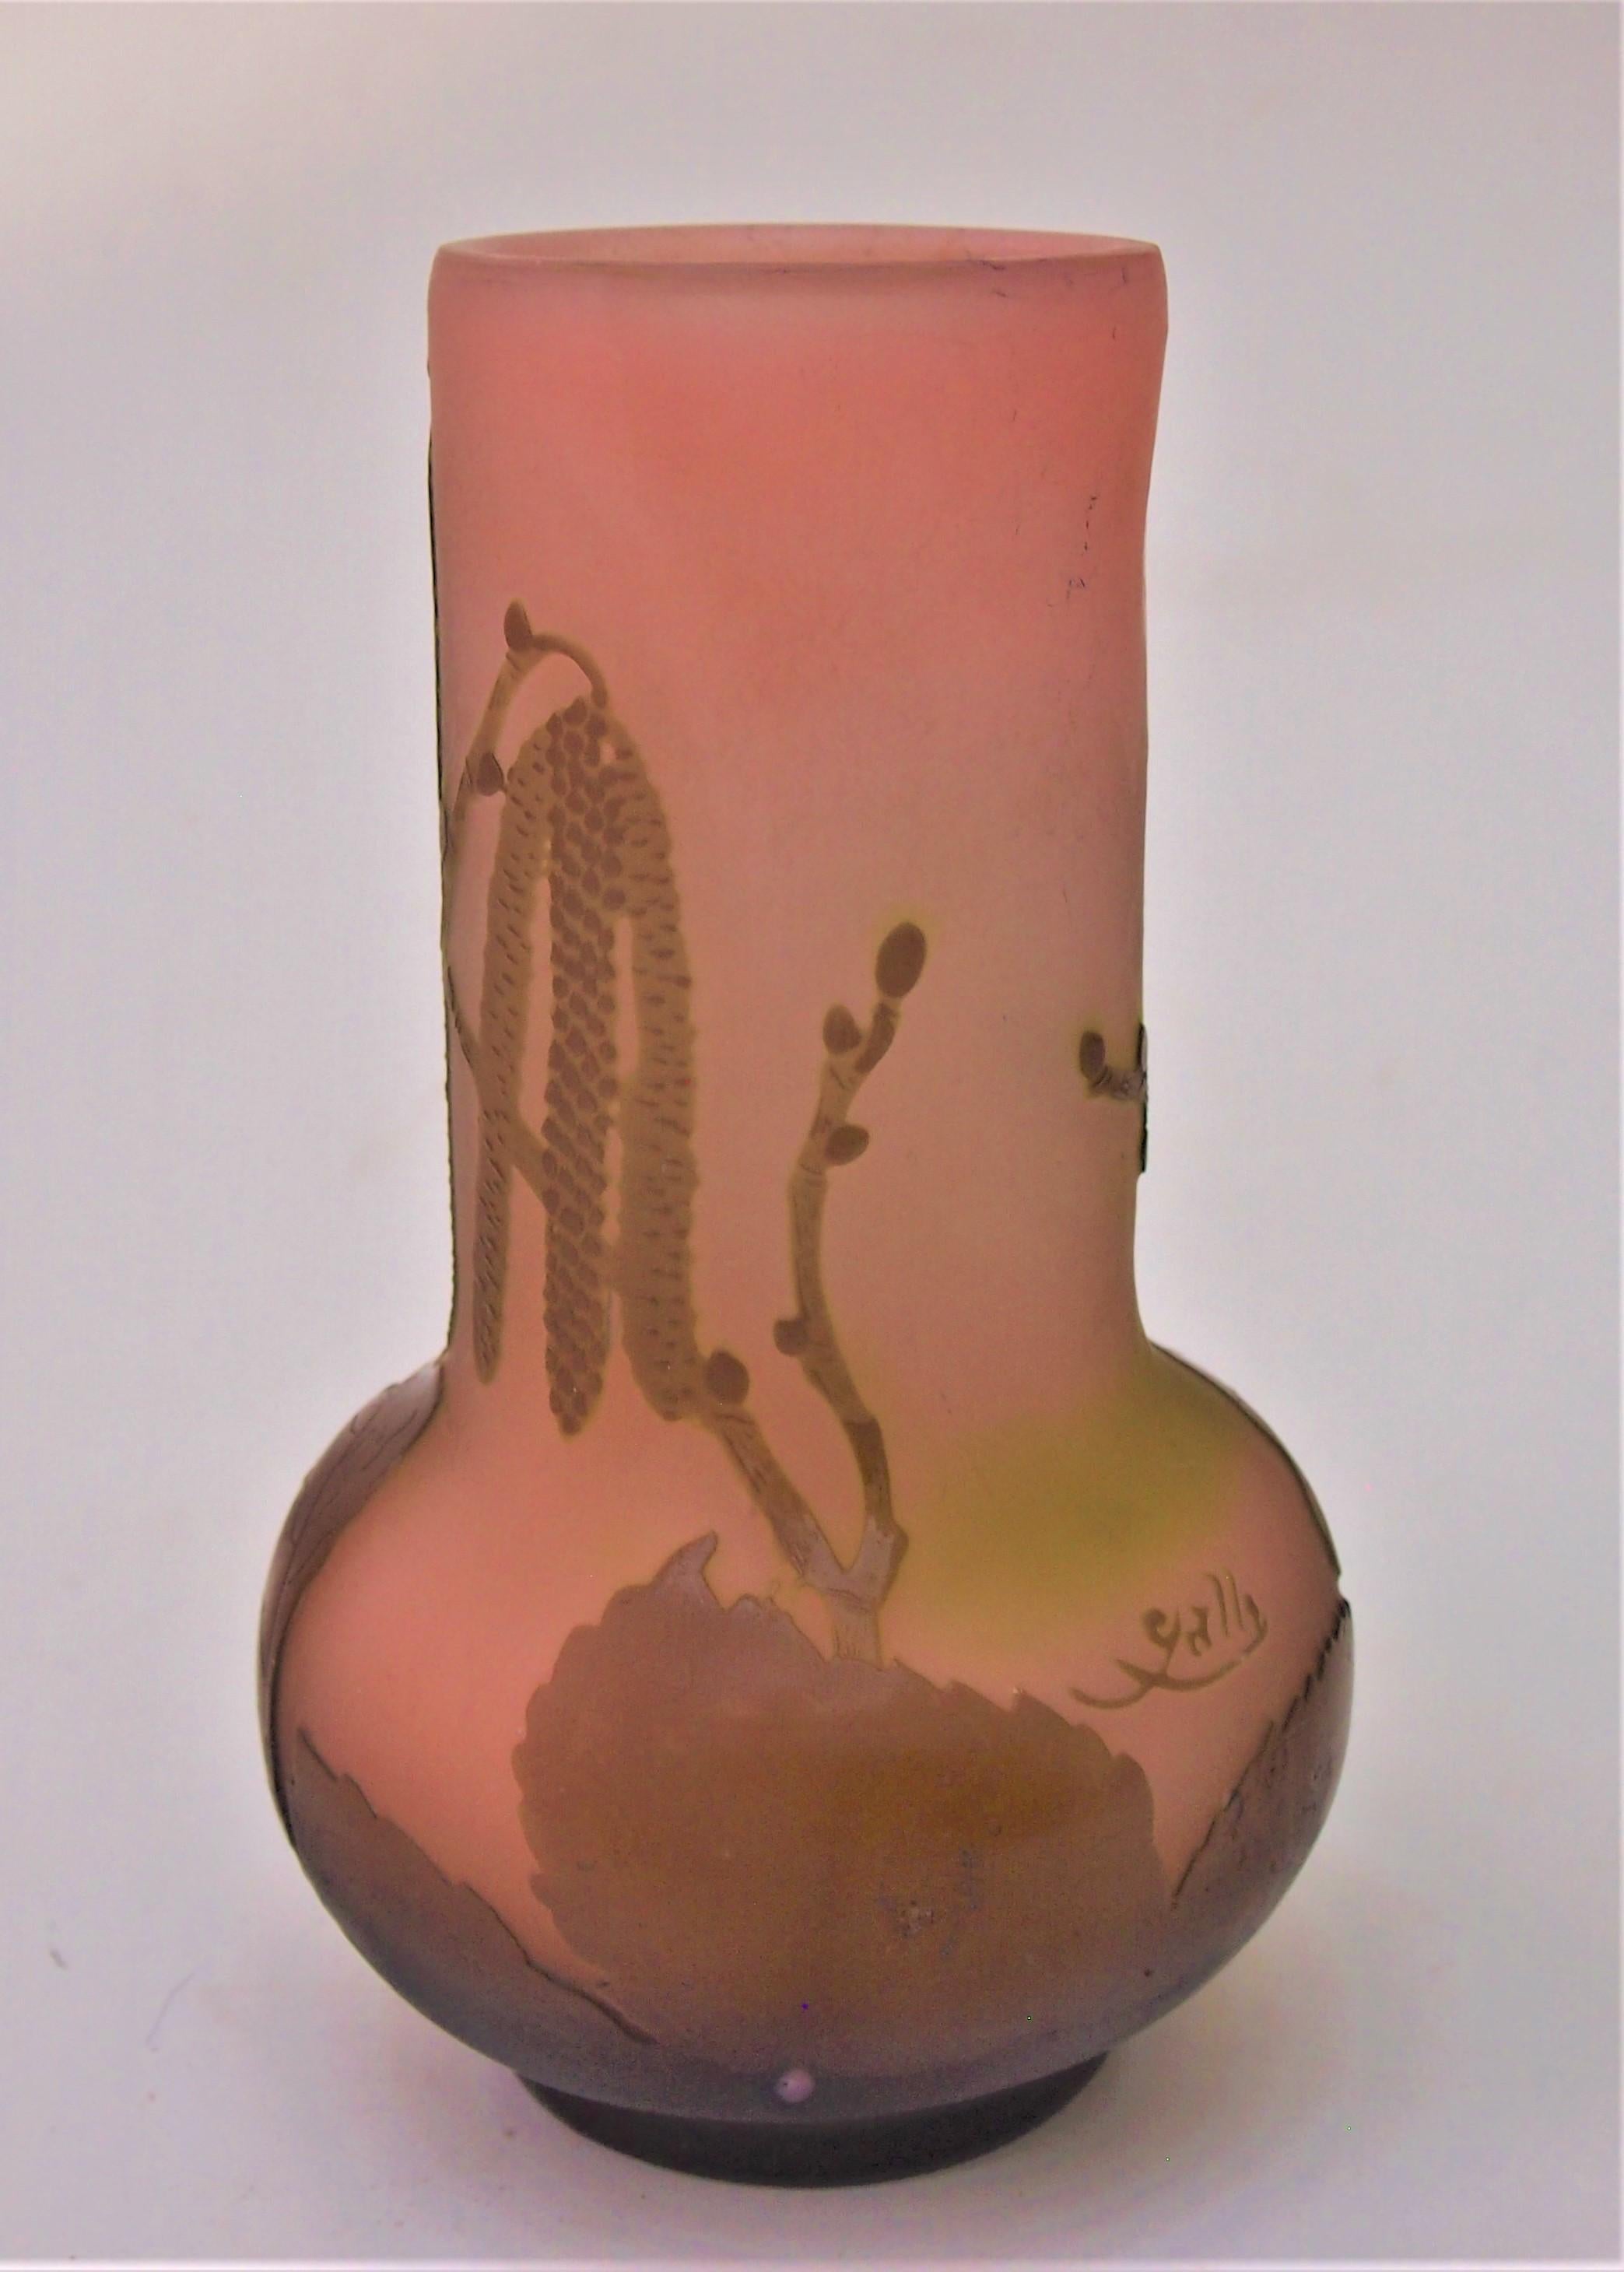 Rare green and brown over pink cameo vase depicting 'Chatons du Noisetier', i.e. hazelnut catkins; a pattern designed 1906 (Design is mention in the 1906 new list ref: Provost) (designed by Paul Nicolas before his departure to St Louis) this example